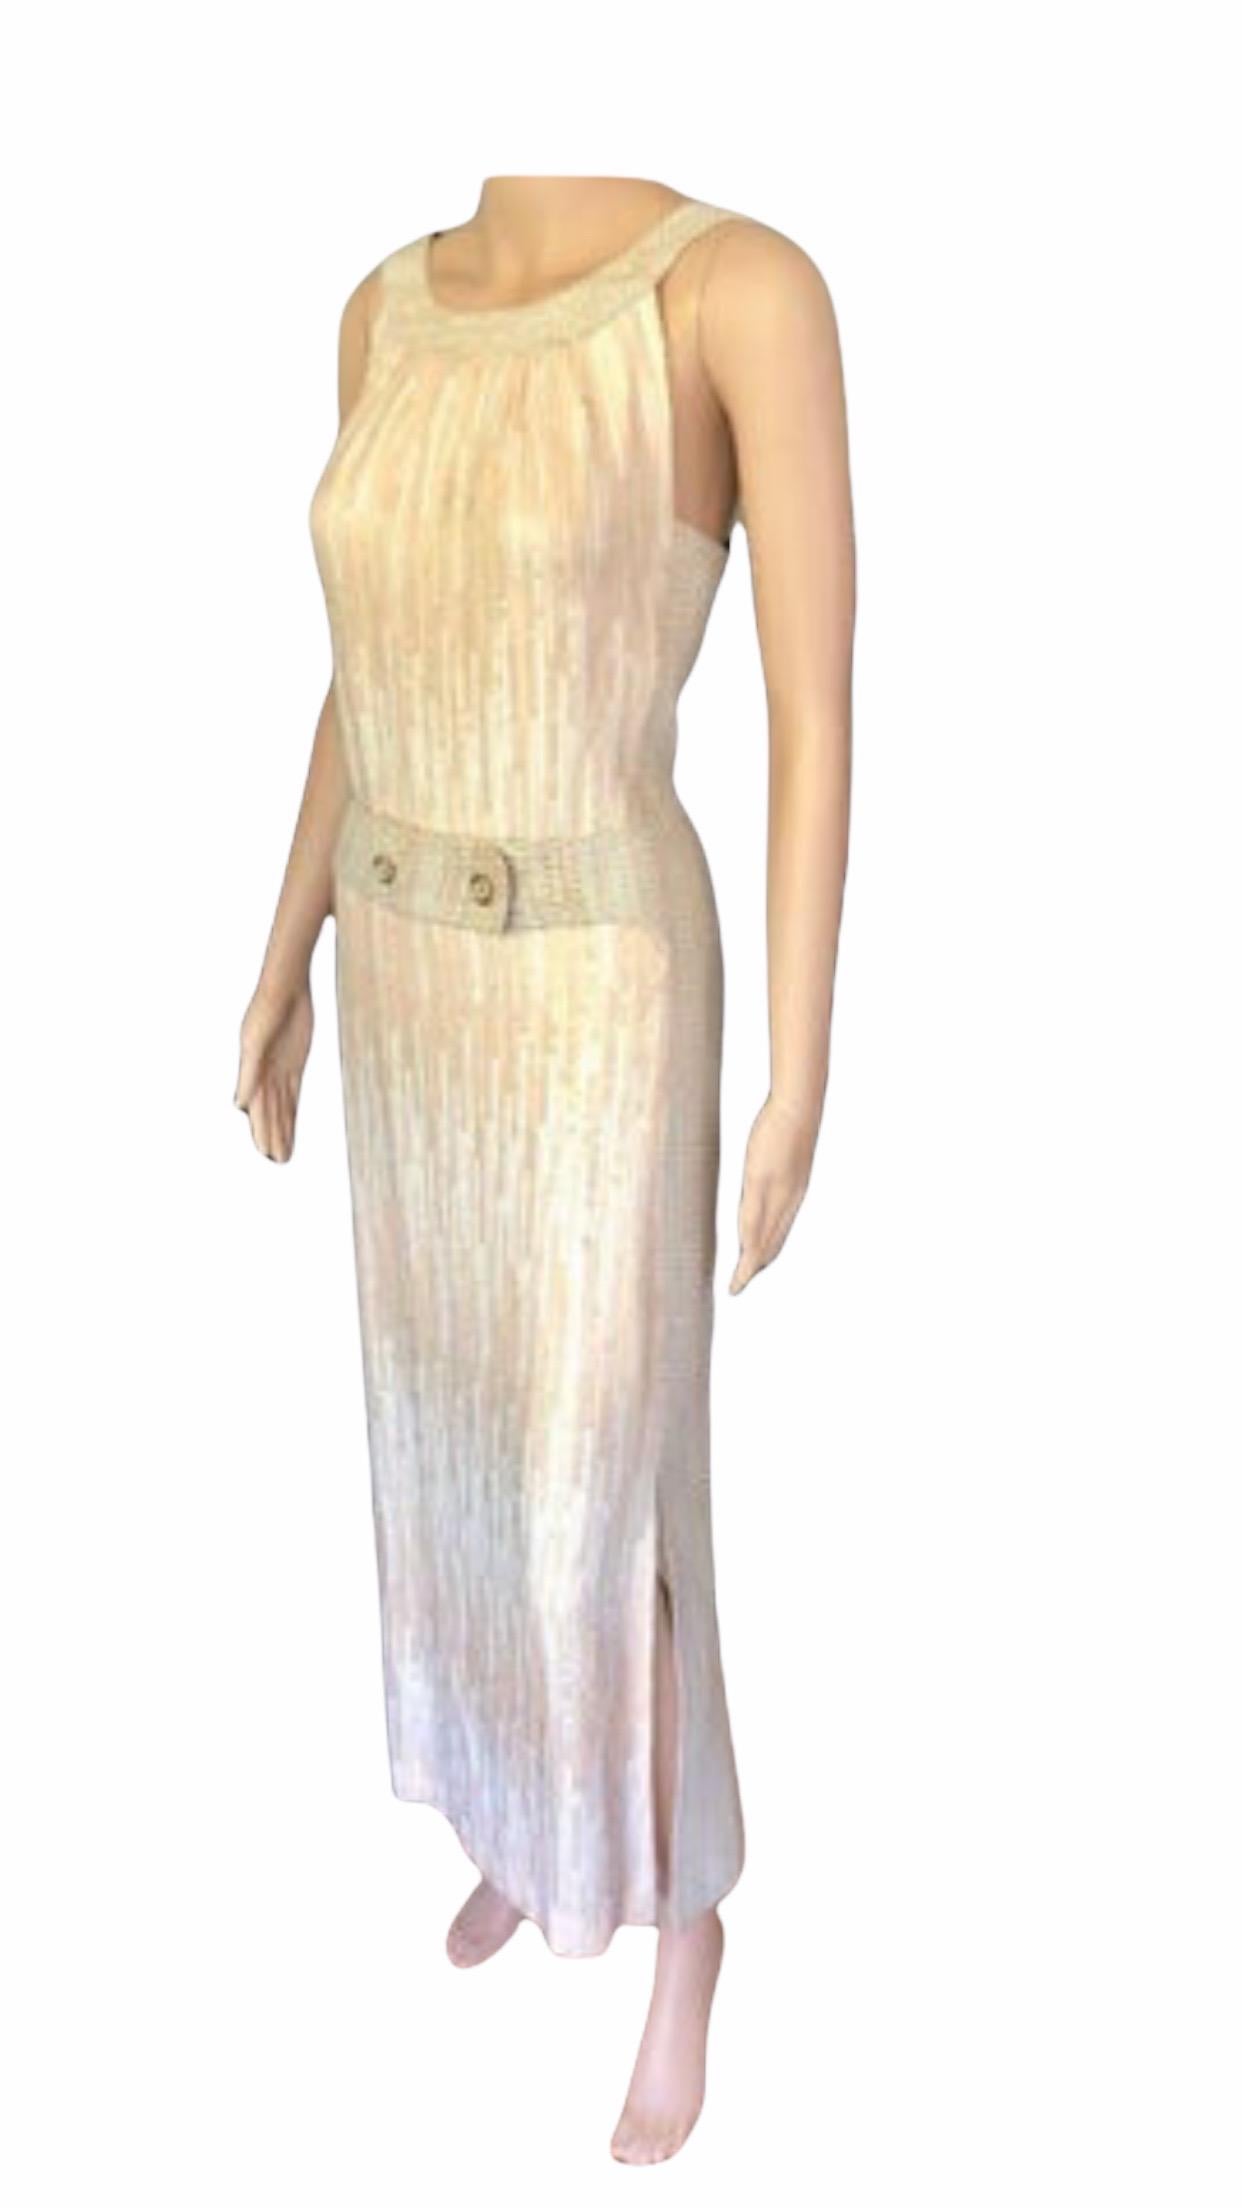 Chanel F/W 2001 Runway Sequin Embellished Tweed Dress In Good Condition For Sale In Naples, FL